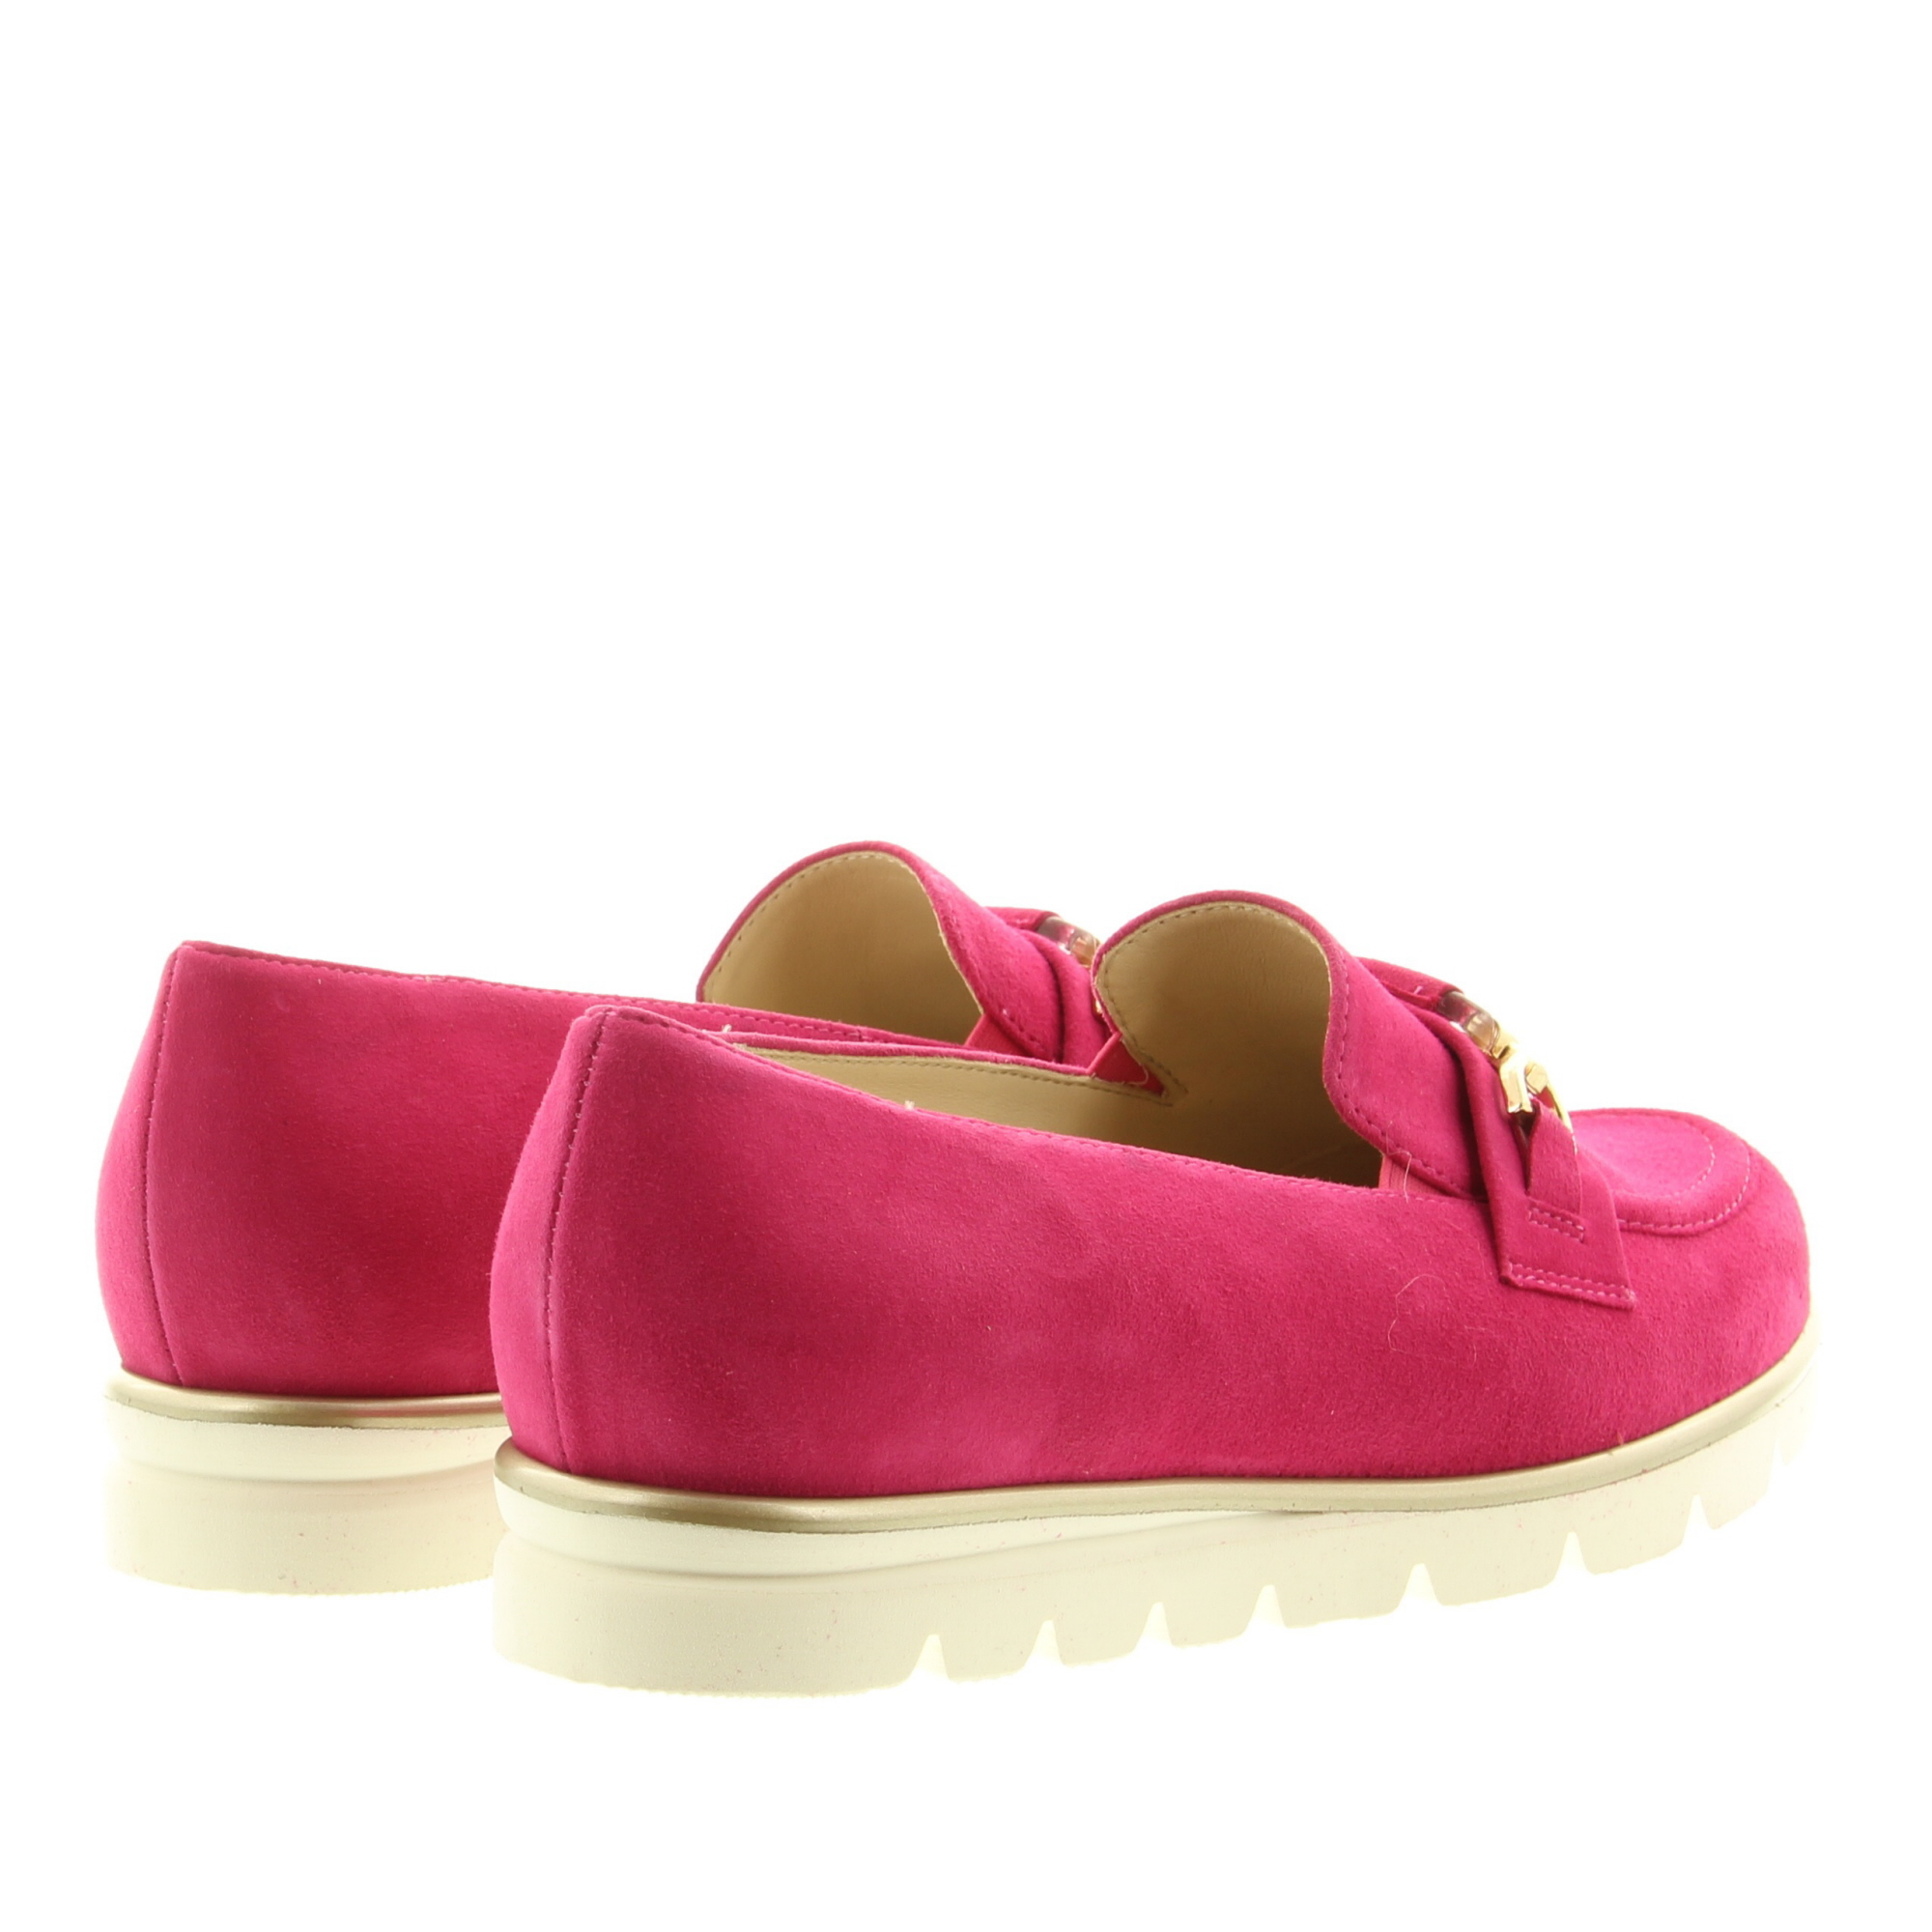 Hassia Shoes 301552 Pisa 4300 Pink